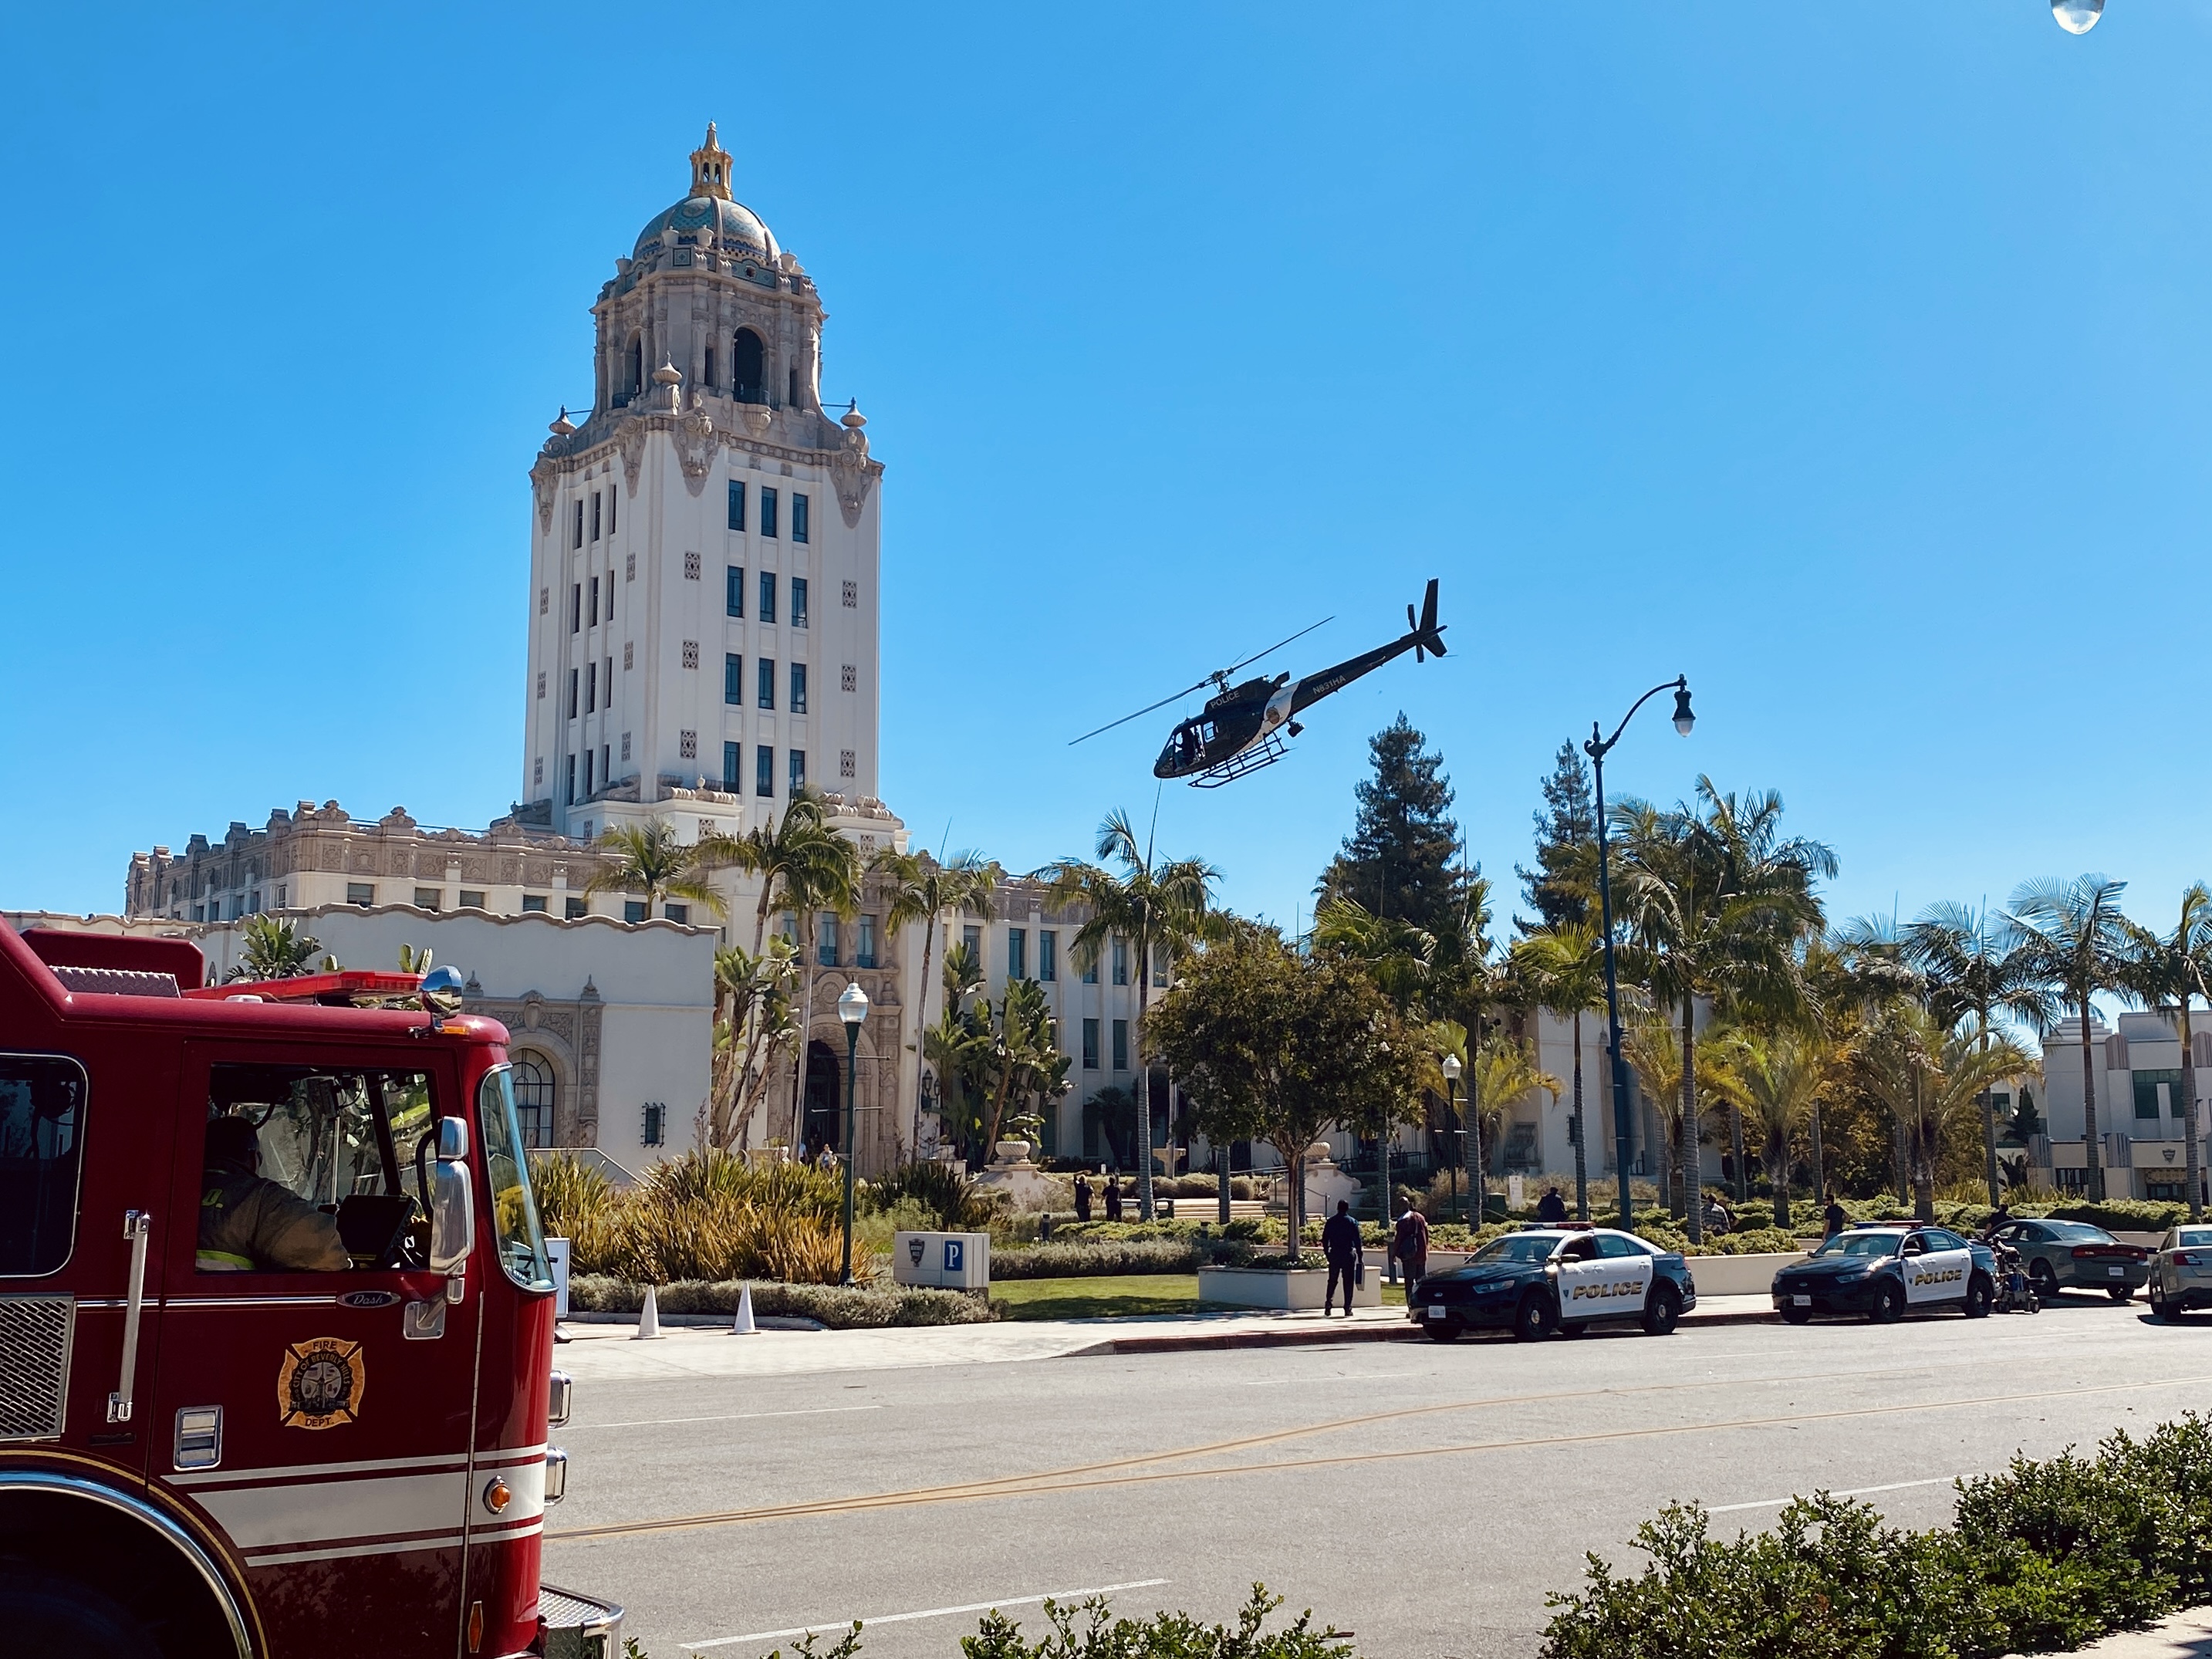 Extremely Rare Beverly Hills Helicopter Landing OK’d For Netflix Film